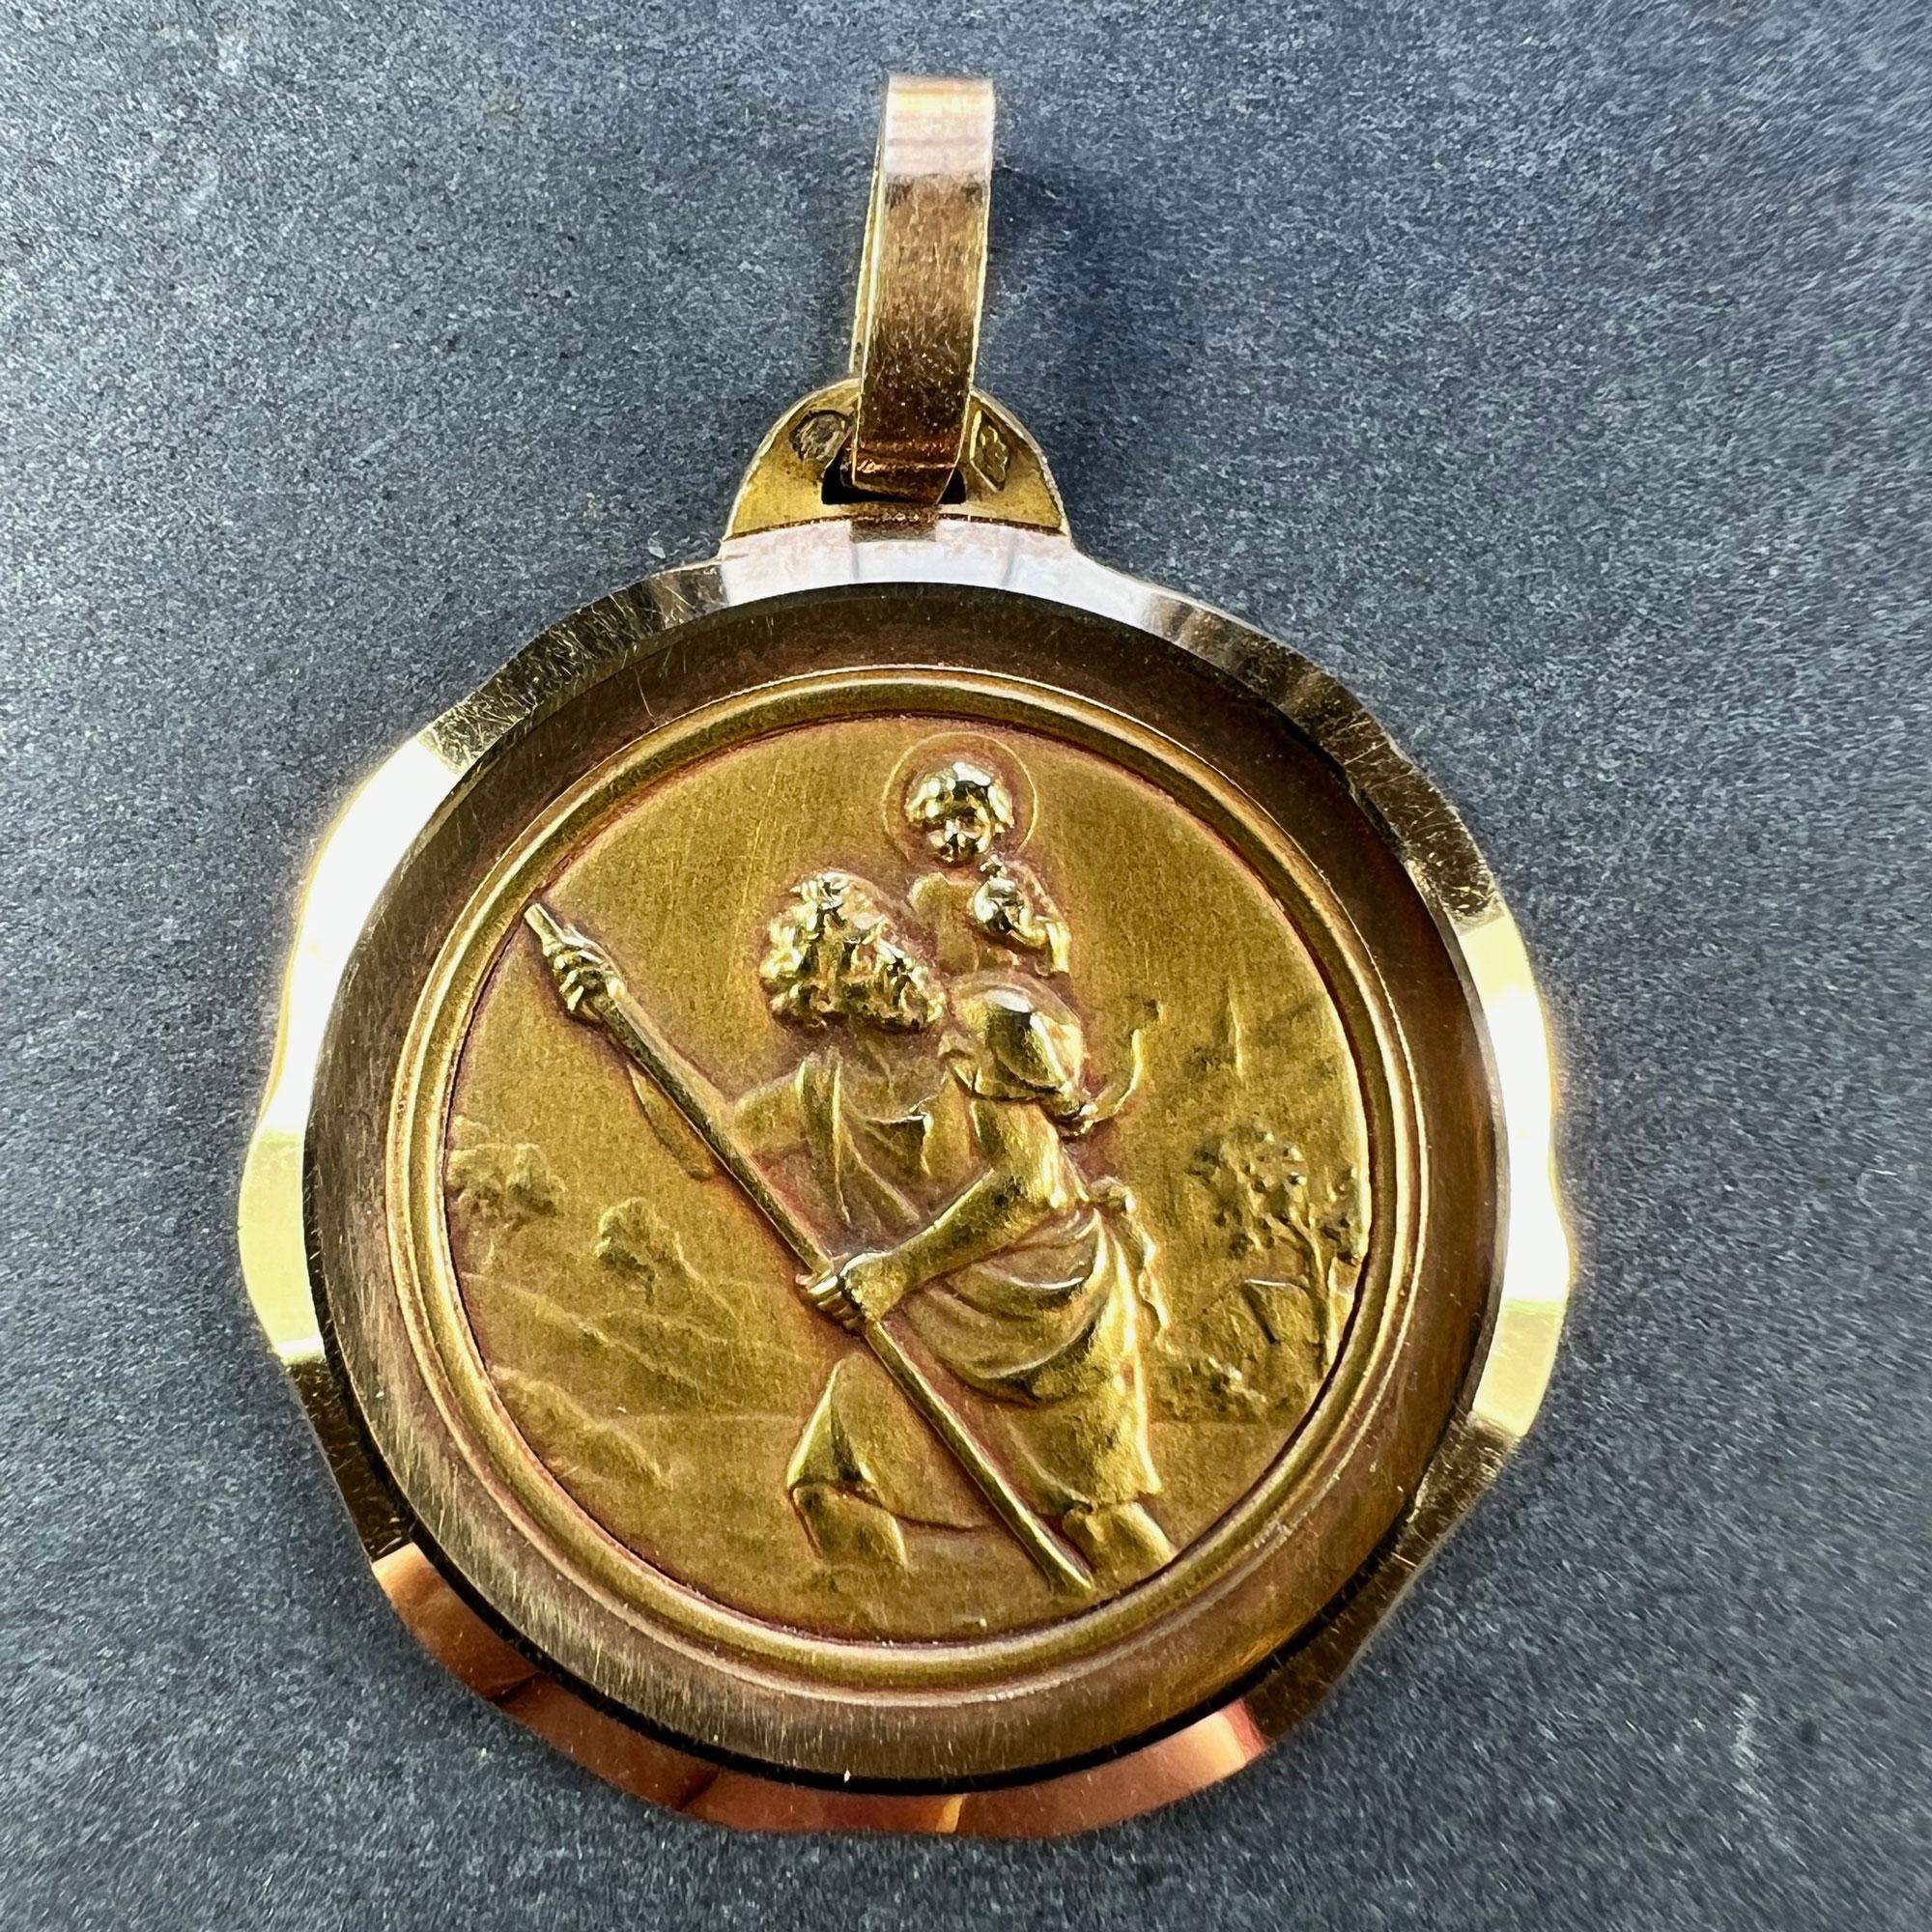 A large French 18 karat (18K) yellow gold charm pendant designed as a medal depicting Saint Christopher as he carries the infant Christ across a river, with a country landscape behind them. Set within a wavy yellow gold frame. Stamped with the